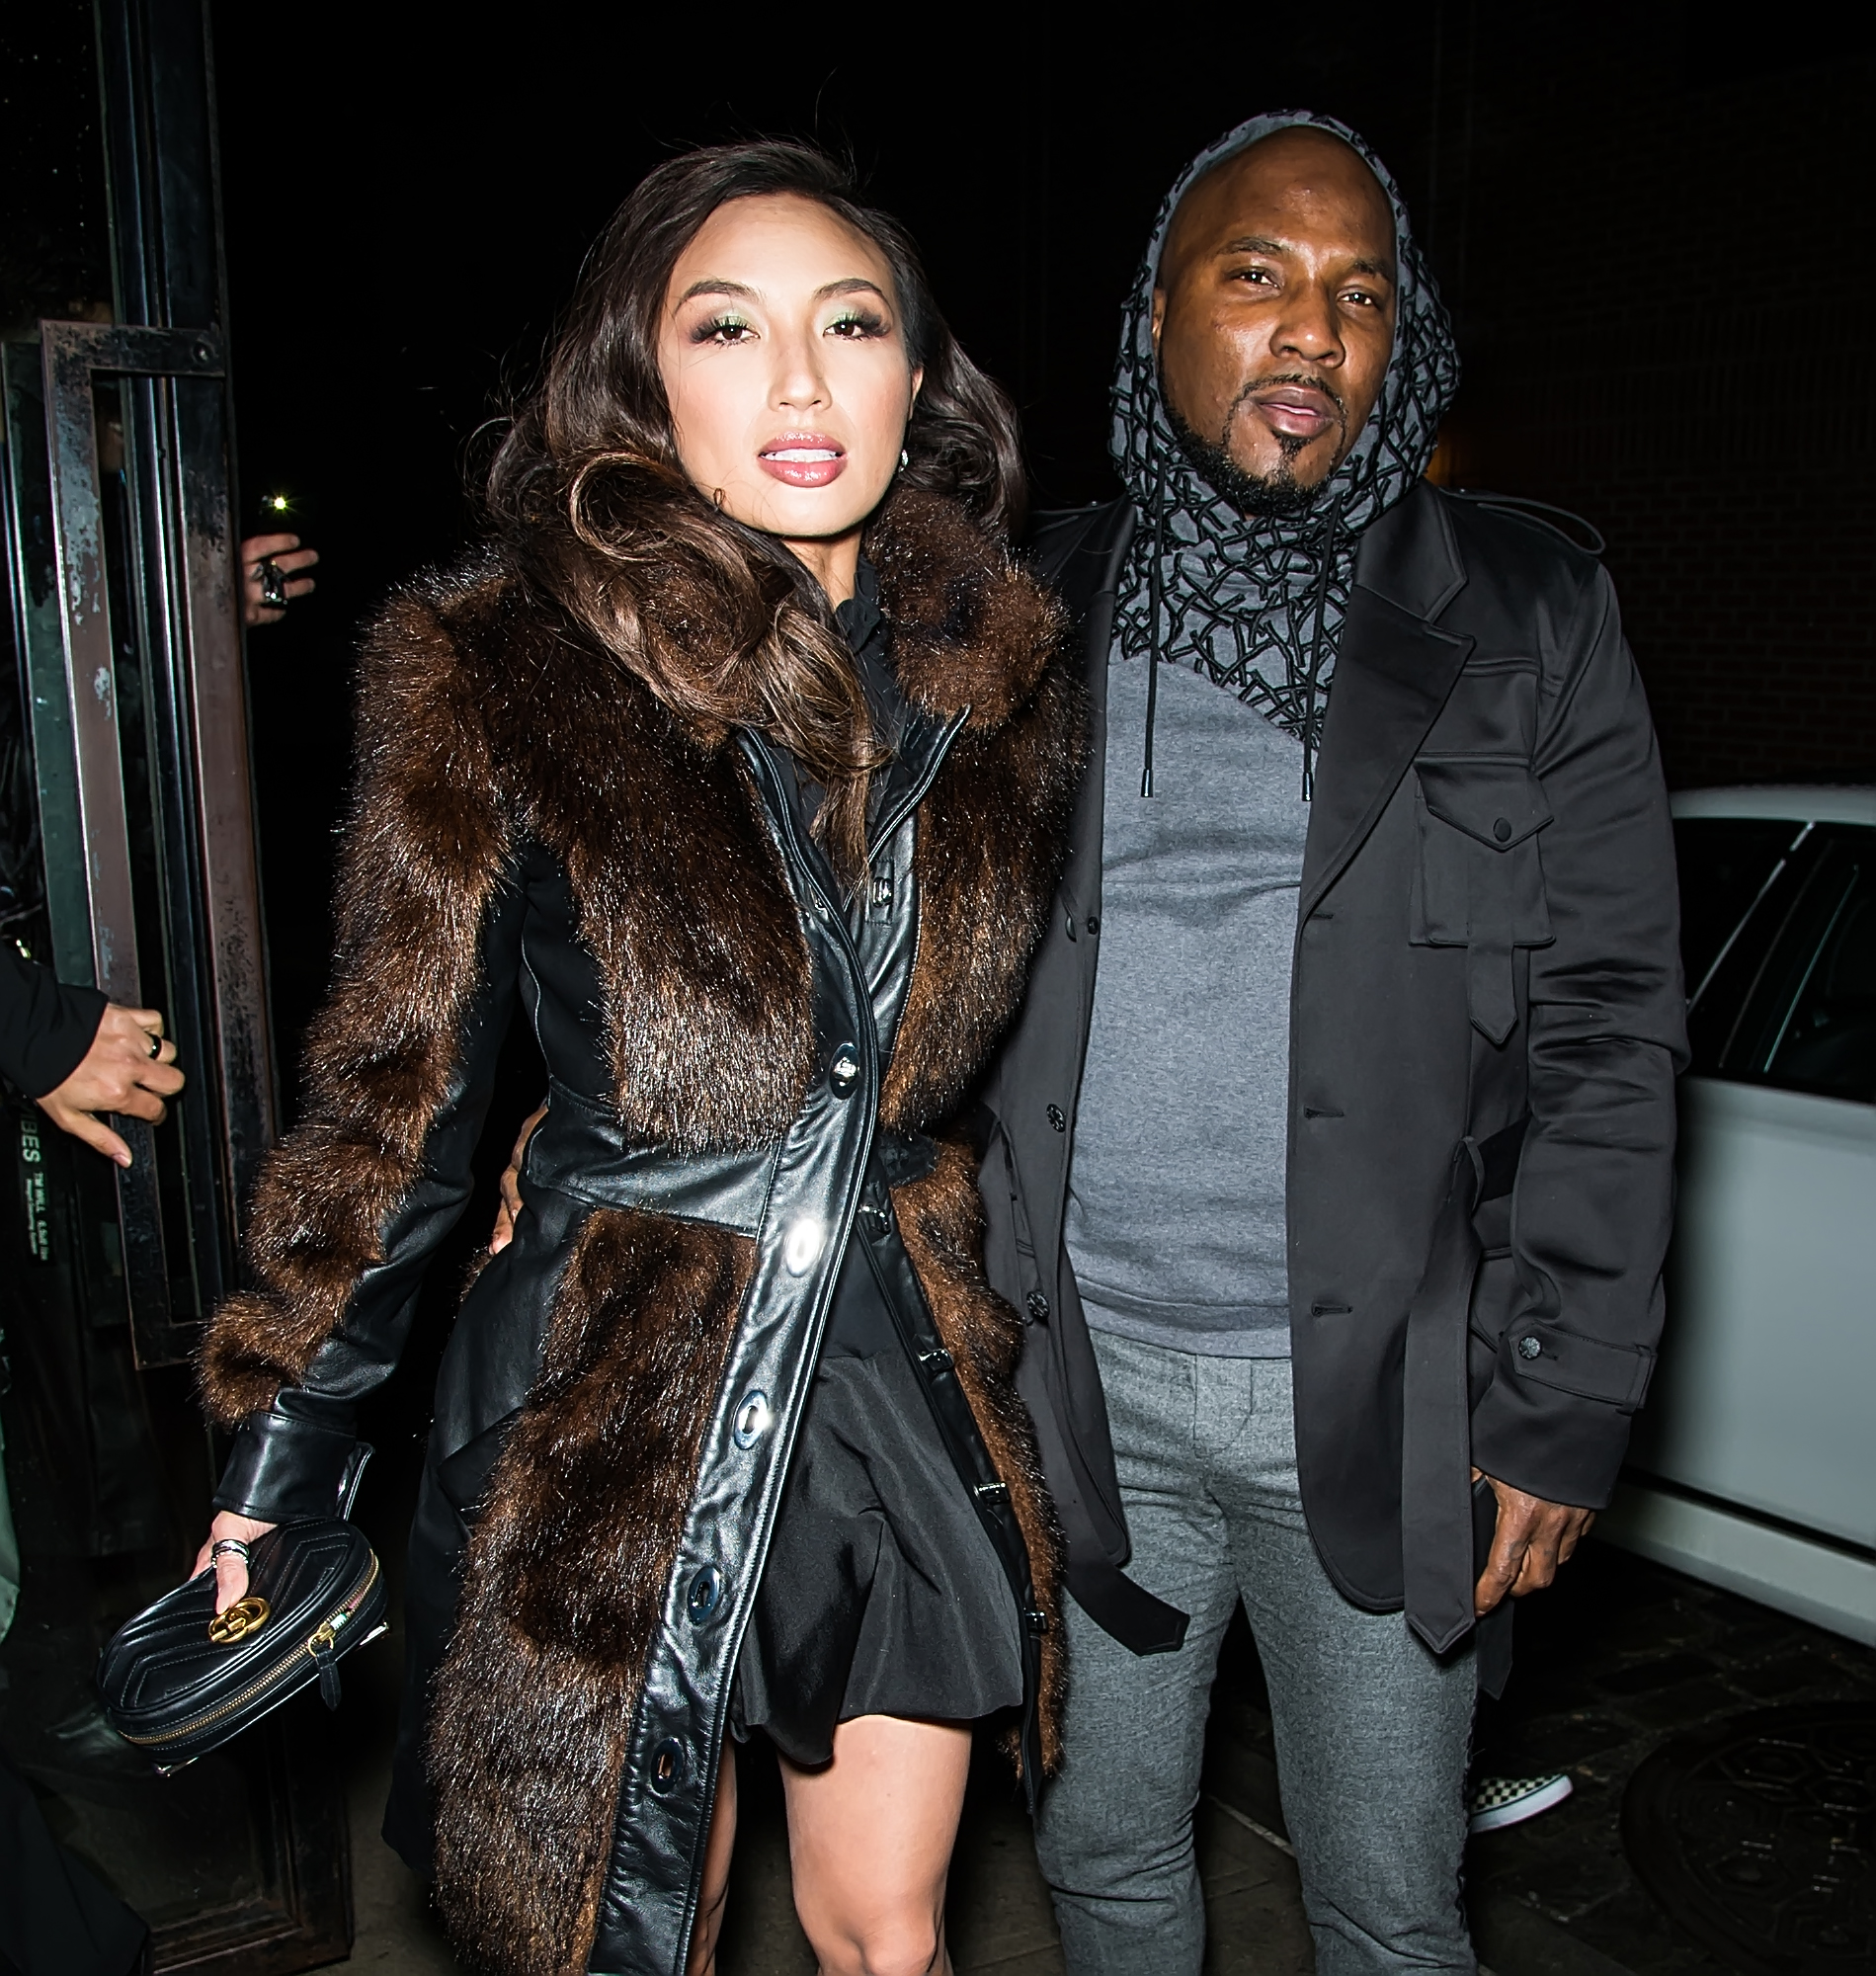 Jeannie Mai and Jeezy attend Christian Siriano's NYFW show together